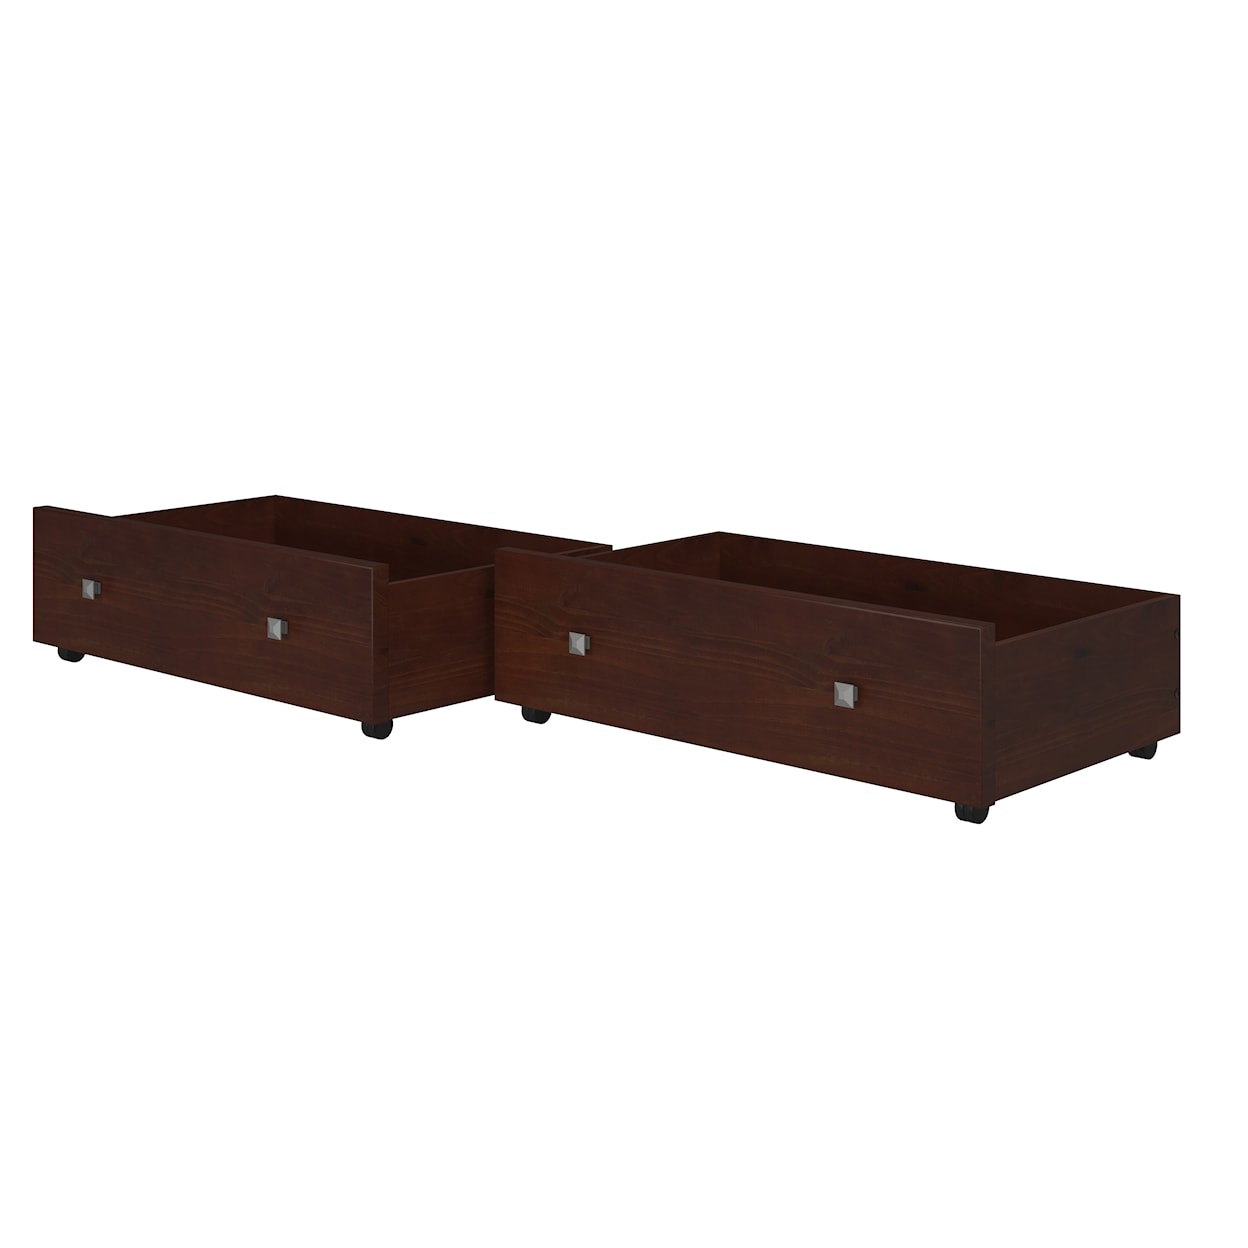 Donco Trading Co 1018 Set of 2 Underbed Storage Drawers